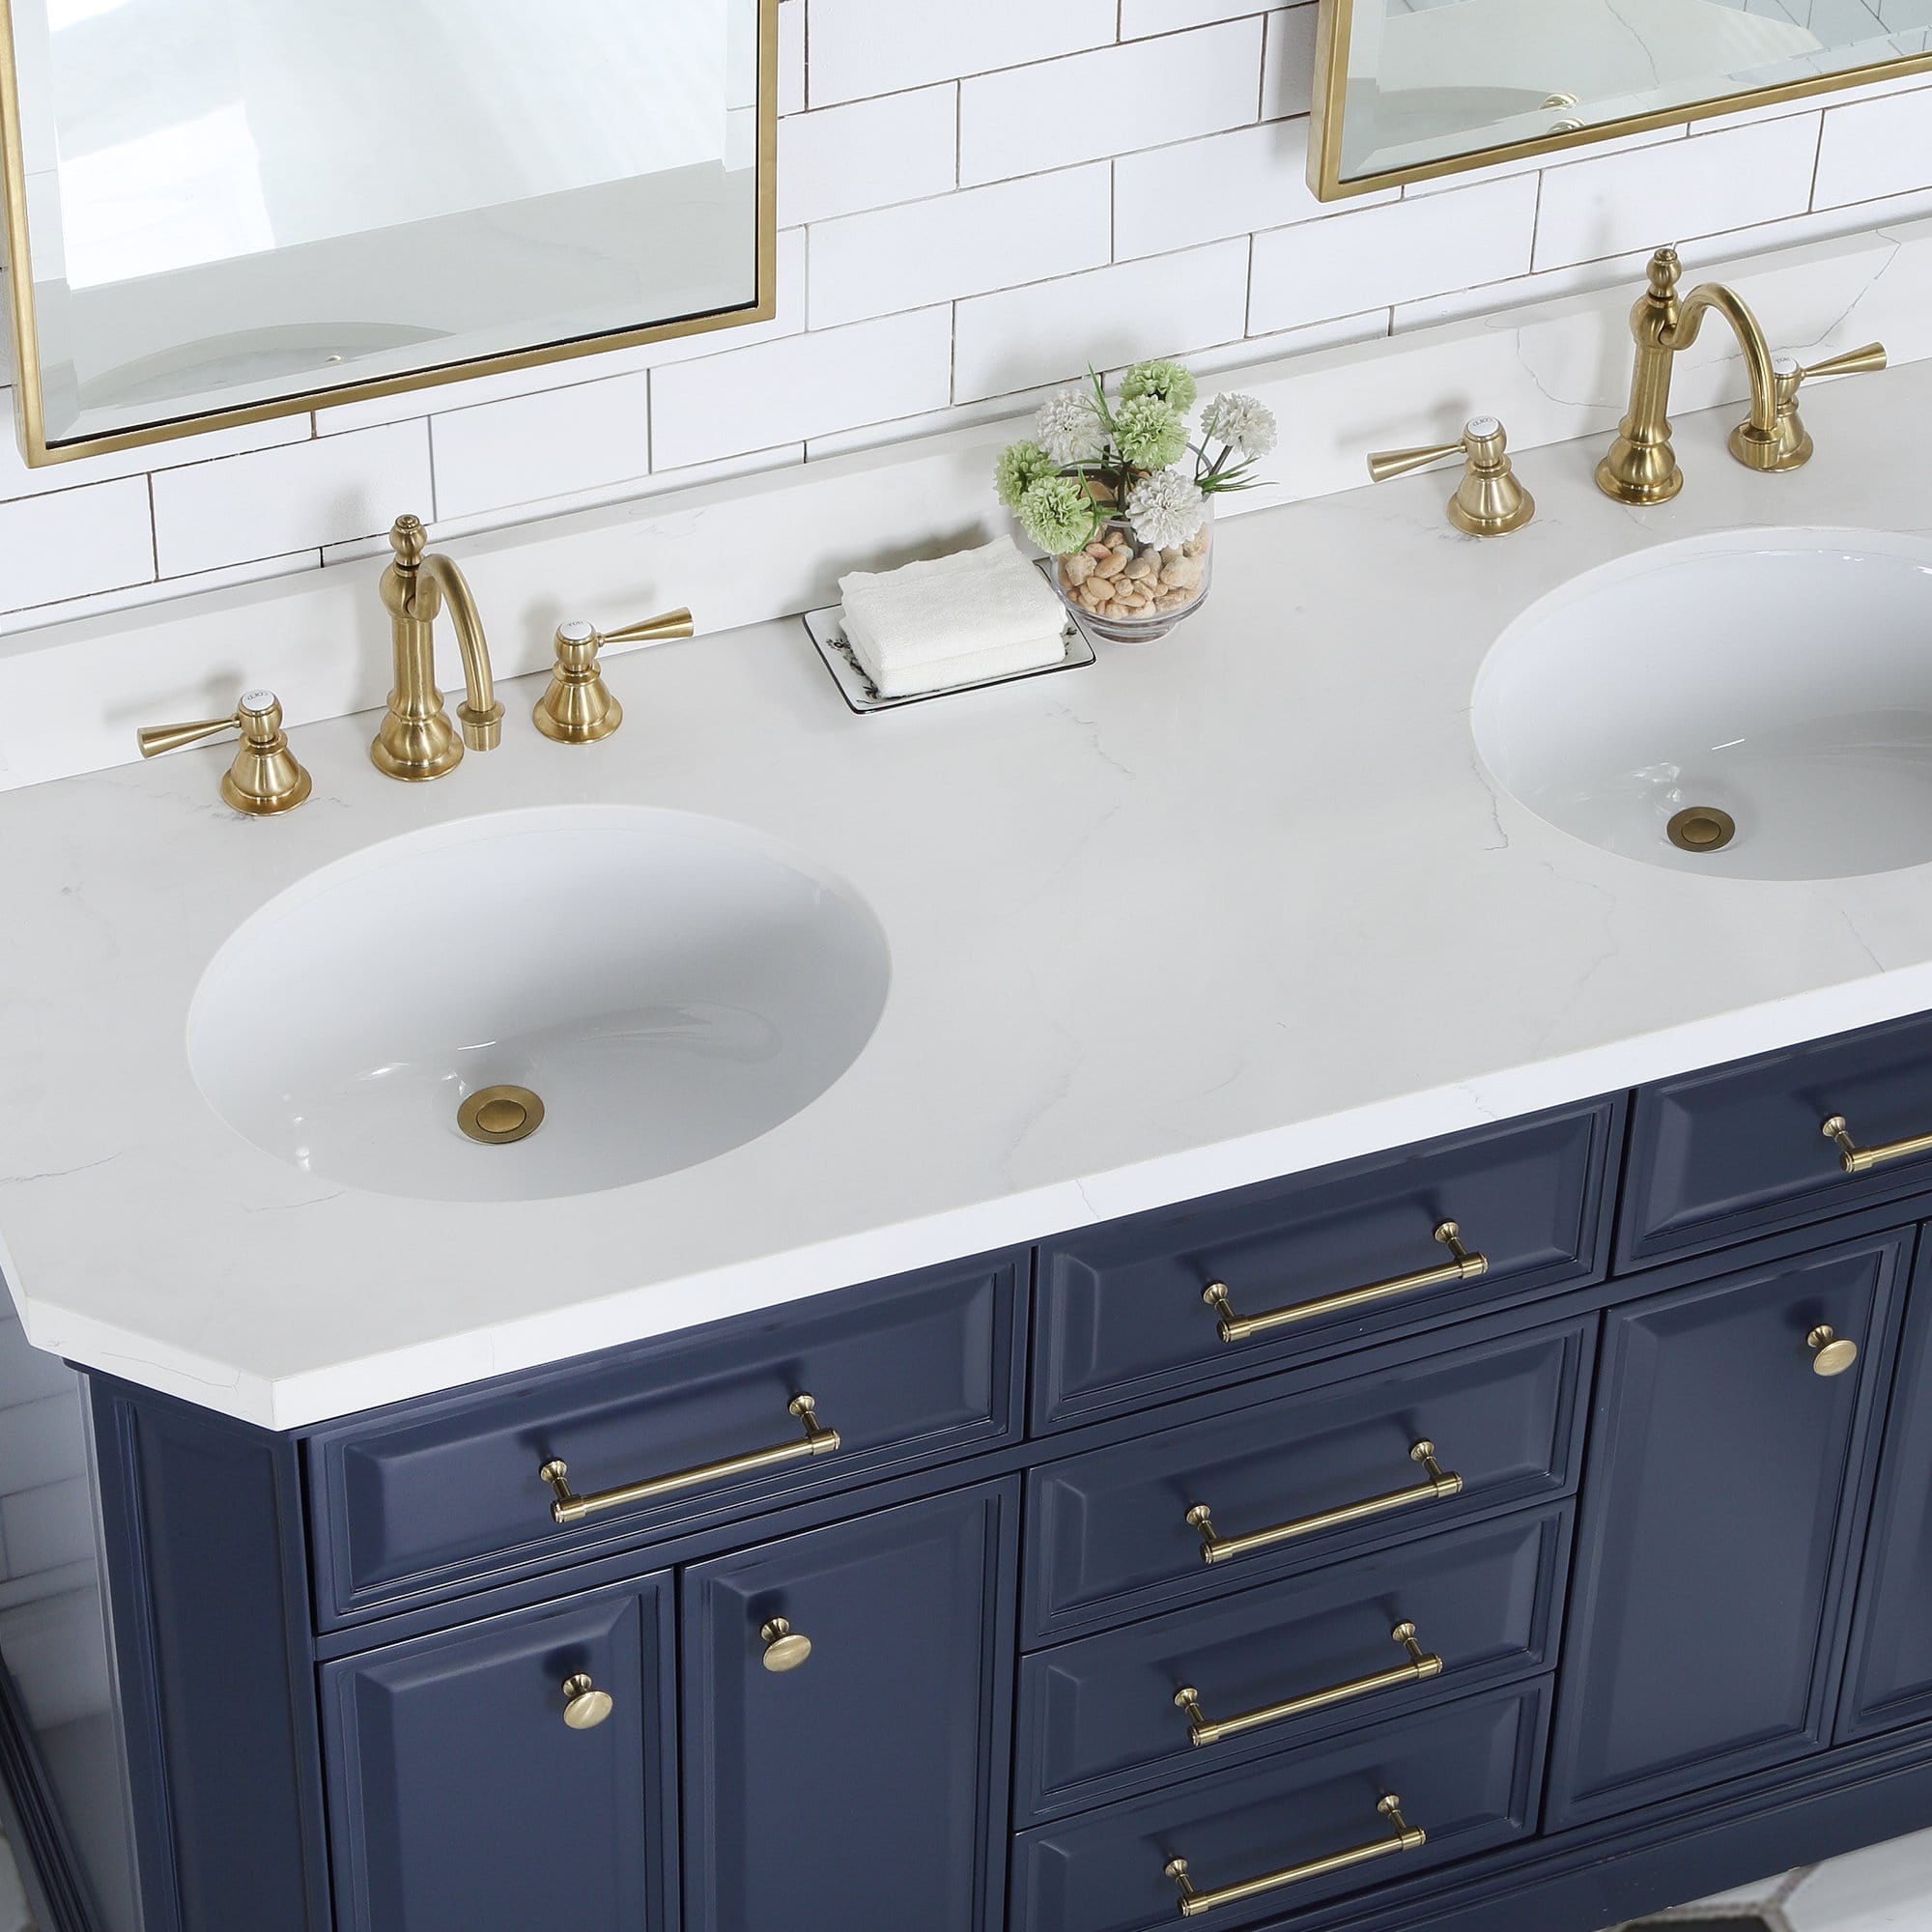 Water Creation Palace 60 In. Double Sink White Quartz Countertop Vanity in Monarch Blue and Mirrors - Molaix732030764989Bathroom vanityPA60QZ06MB-E18000000